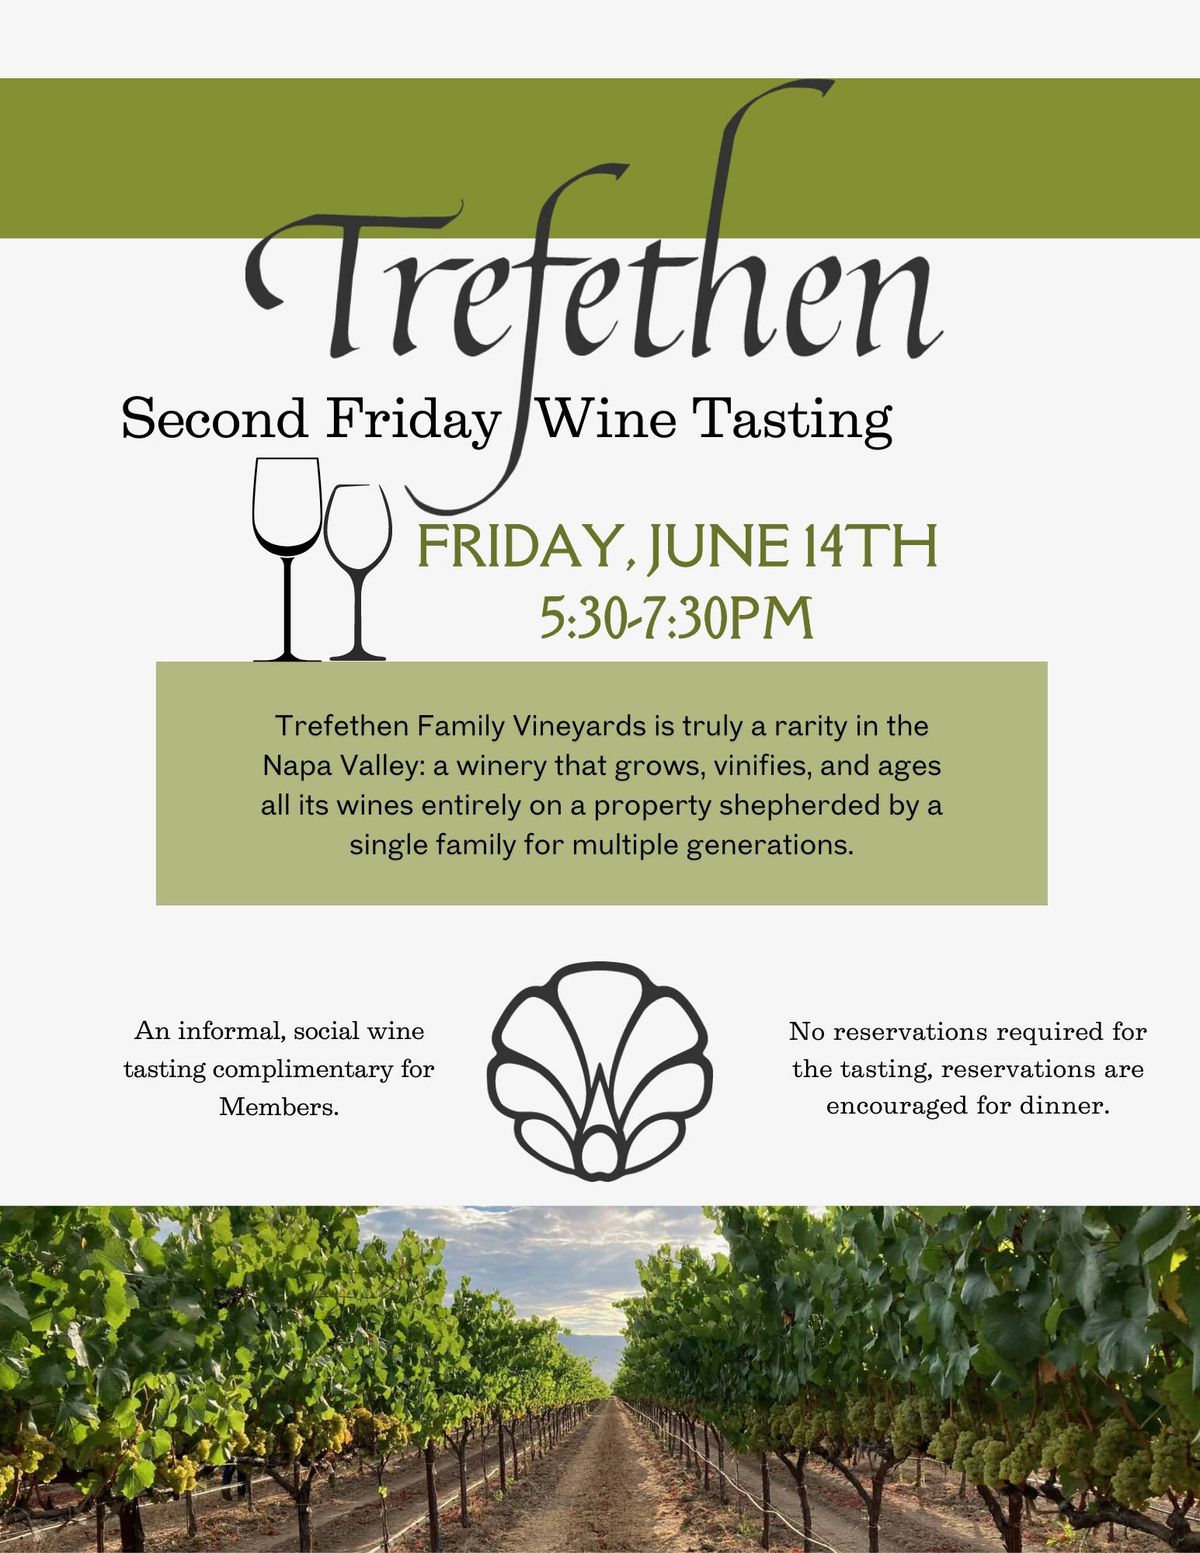 Second Friday Wine Tasting with Trefethen (for members and invited guests only)